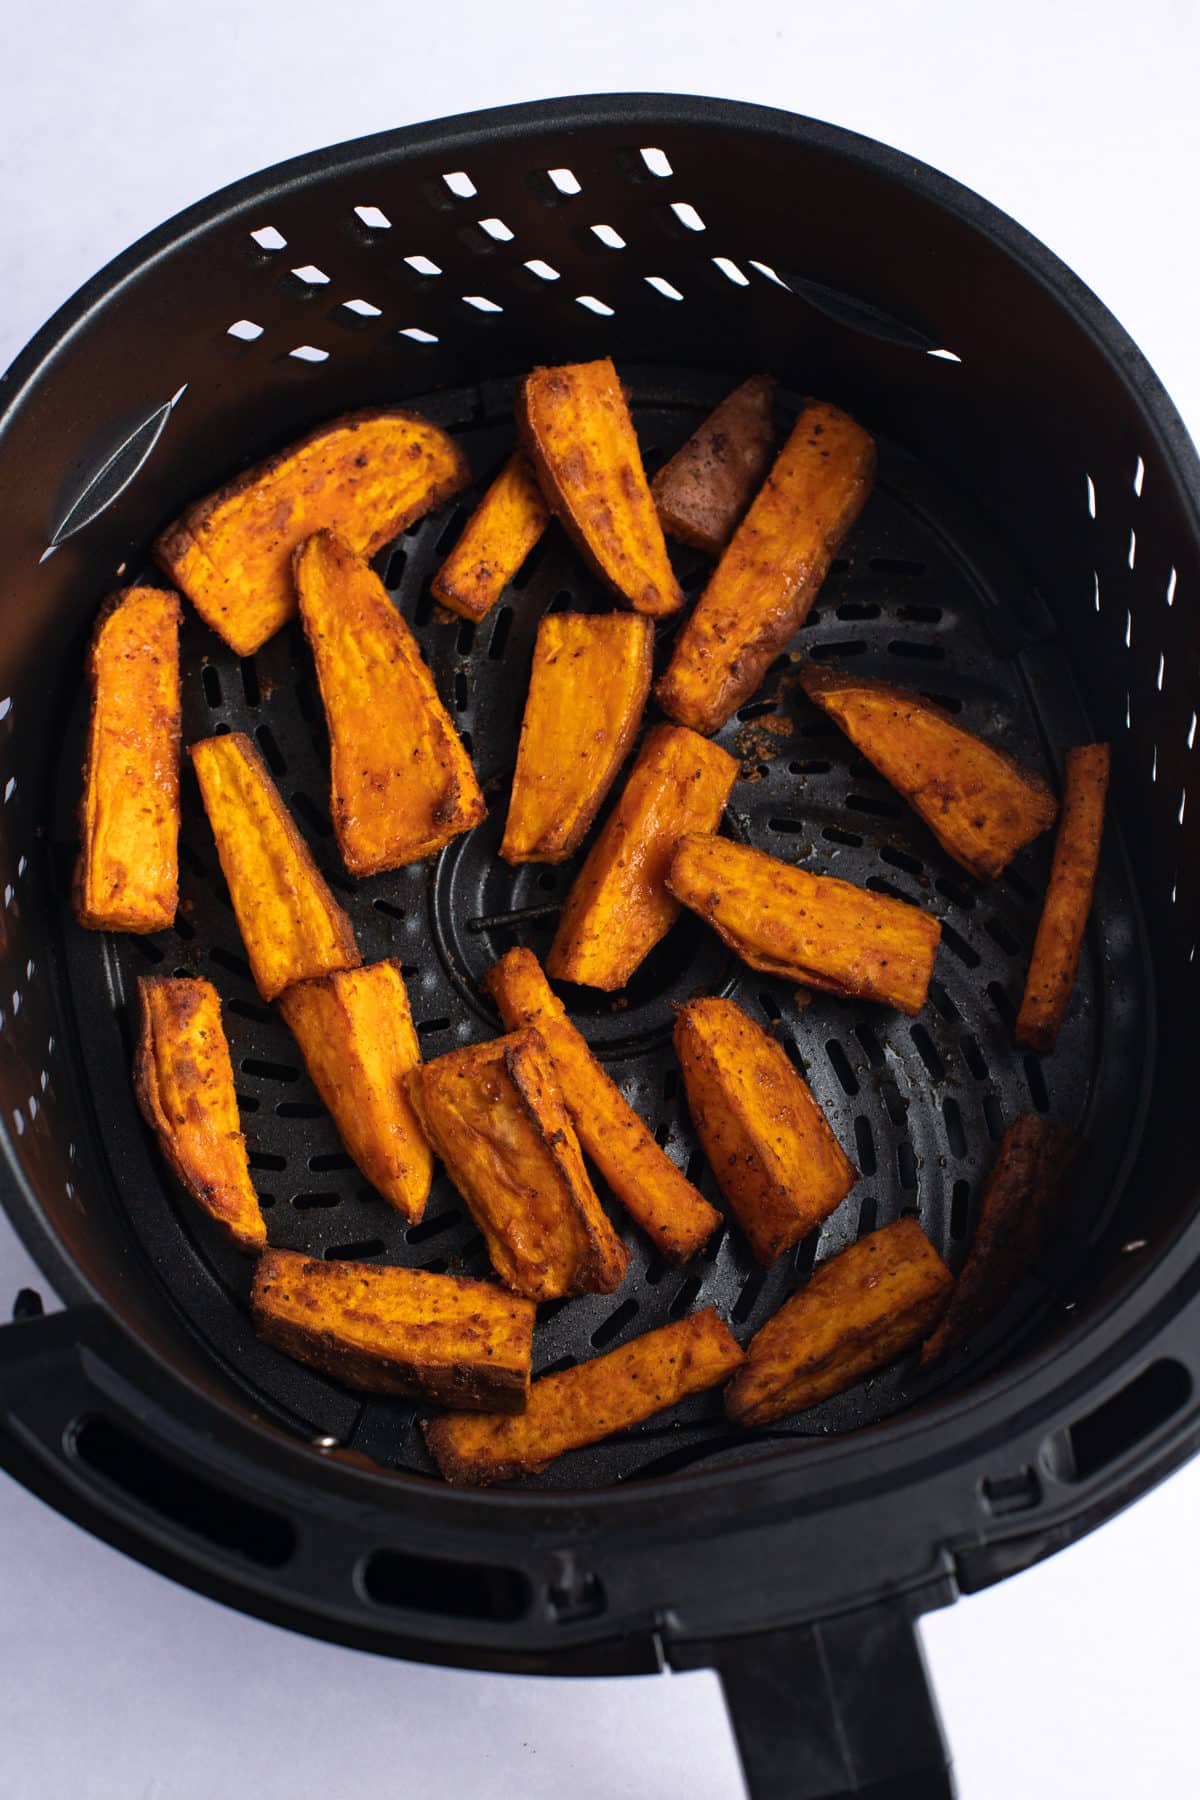 Cooked sweet potato wedges in an air fryer basket.